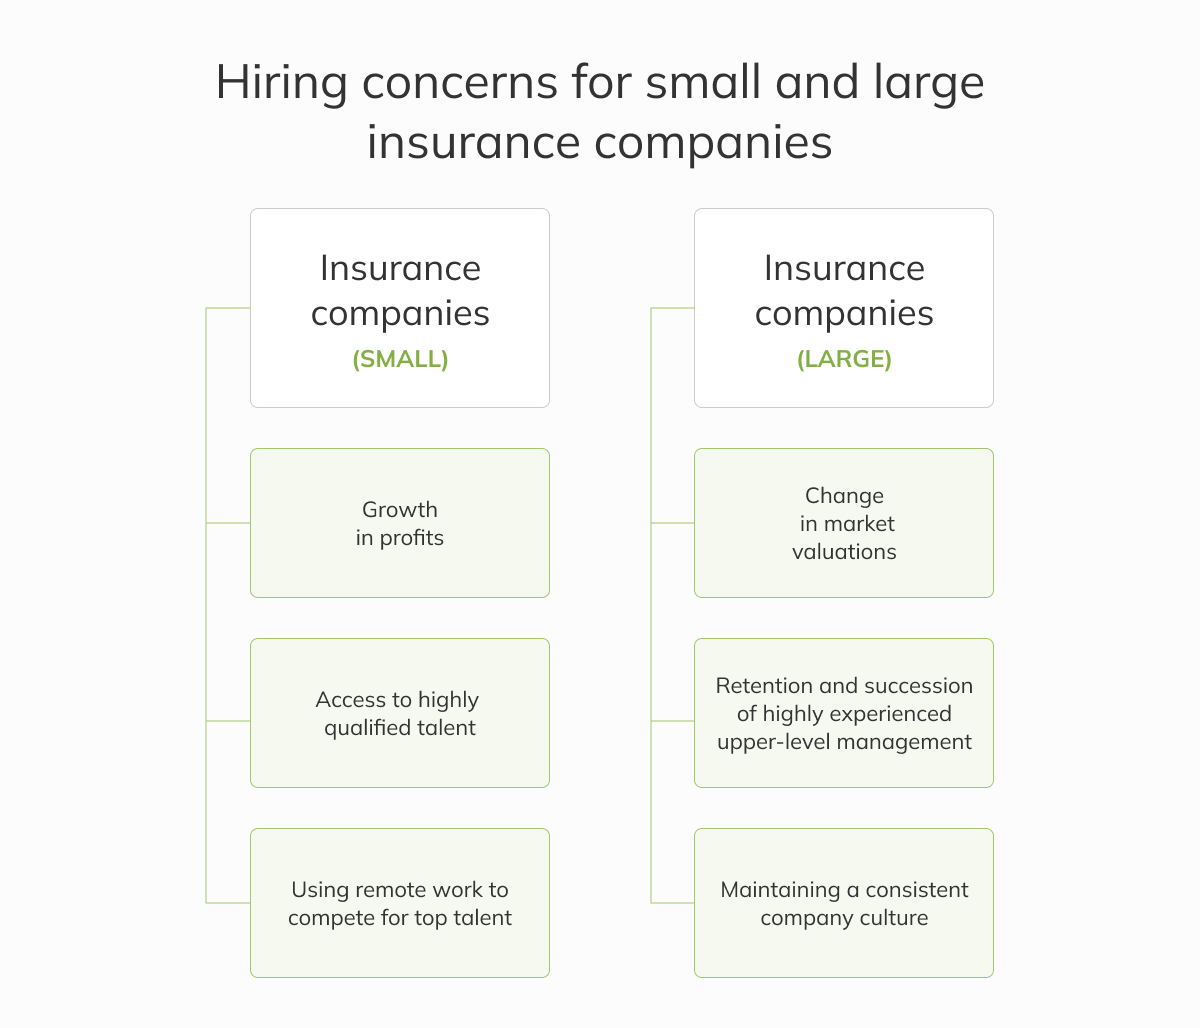 Hiring concerns for small and large insurance companies